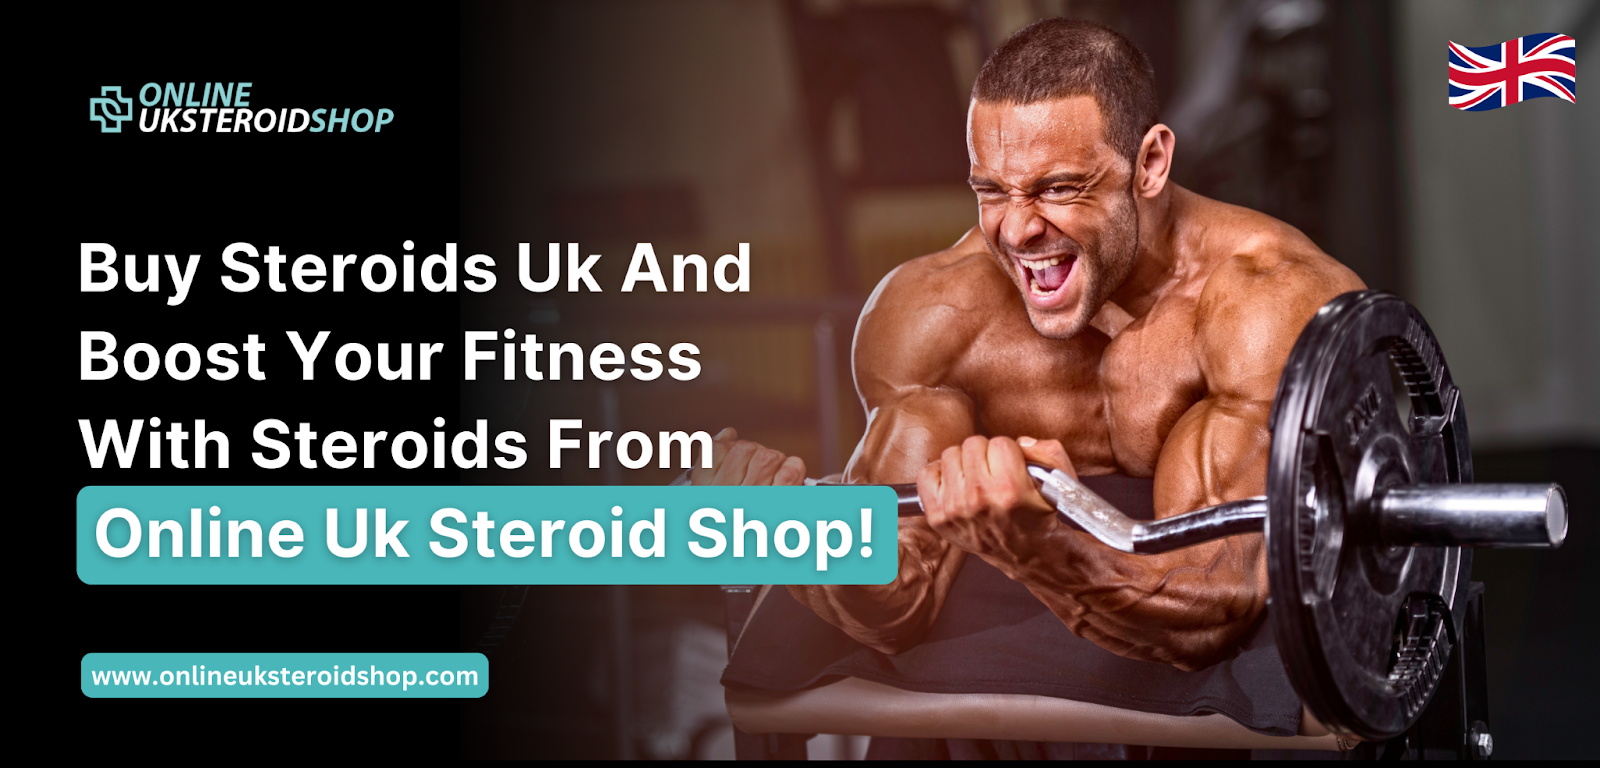 Buy Steroids Uk And Boost Your Fitness With Steroids From Online Uk Steroid Shop!